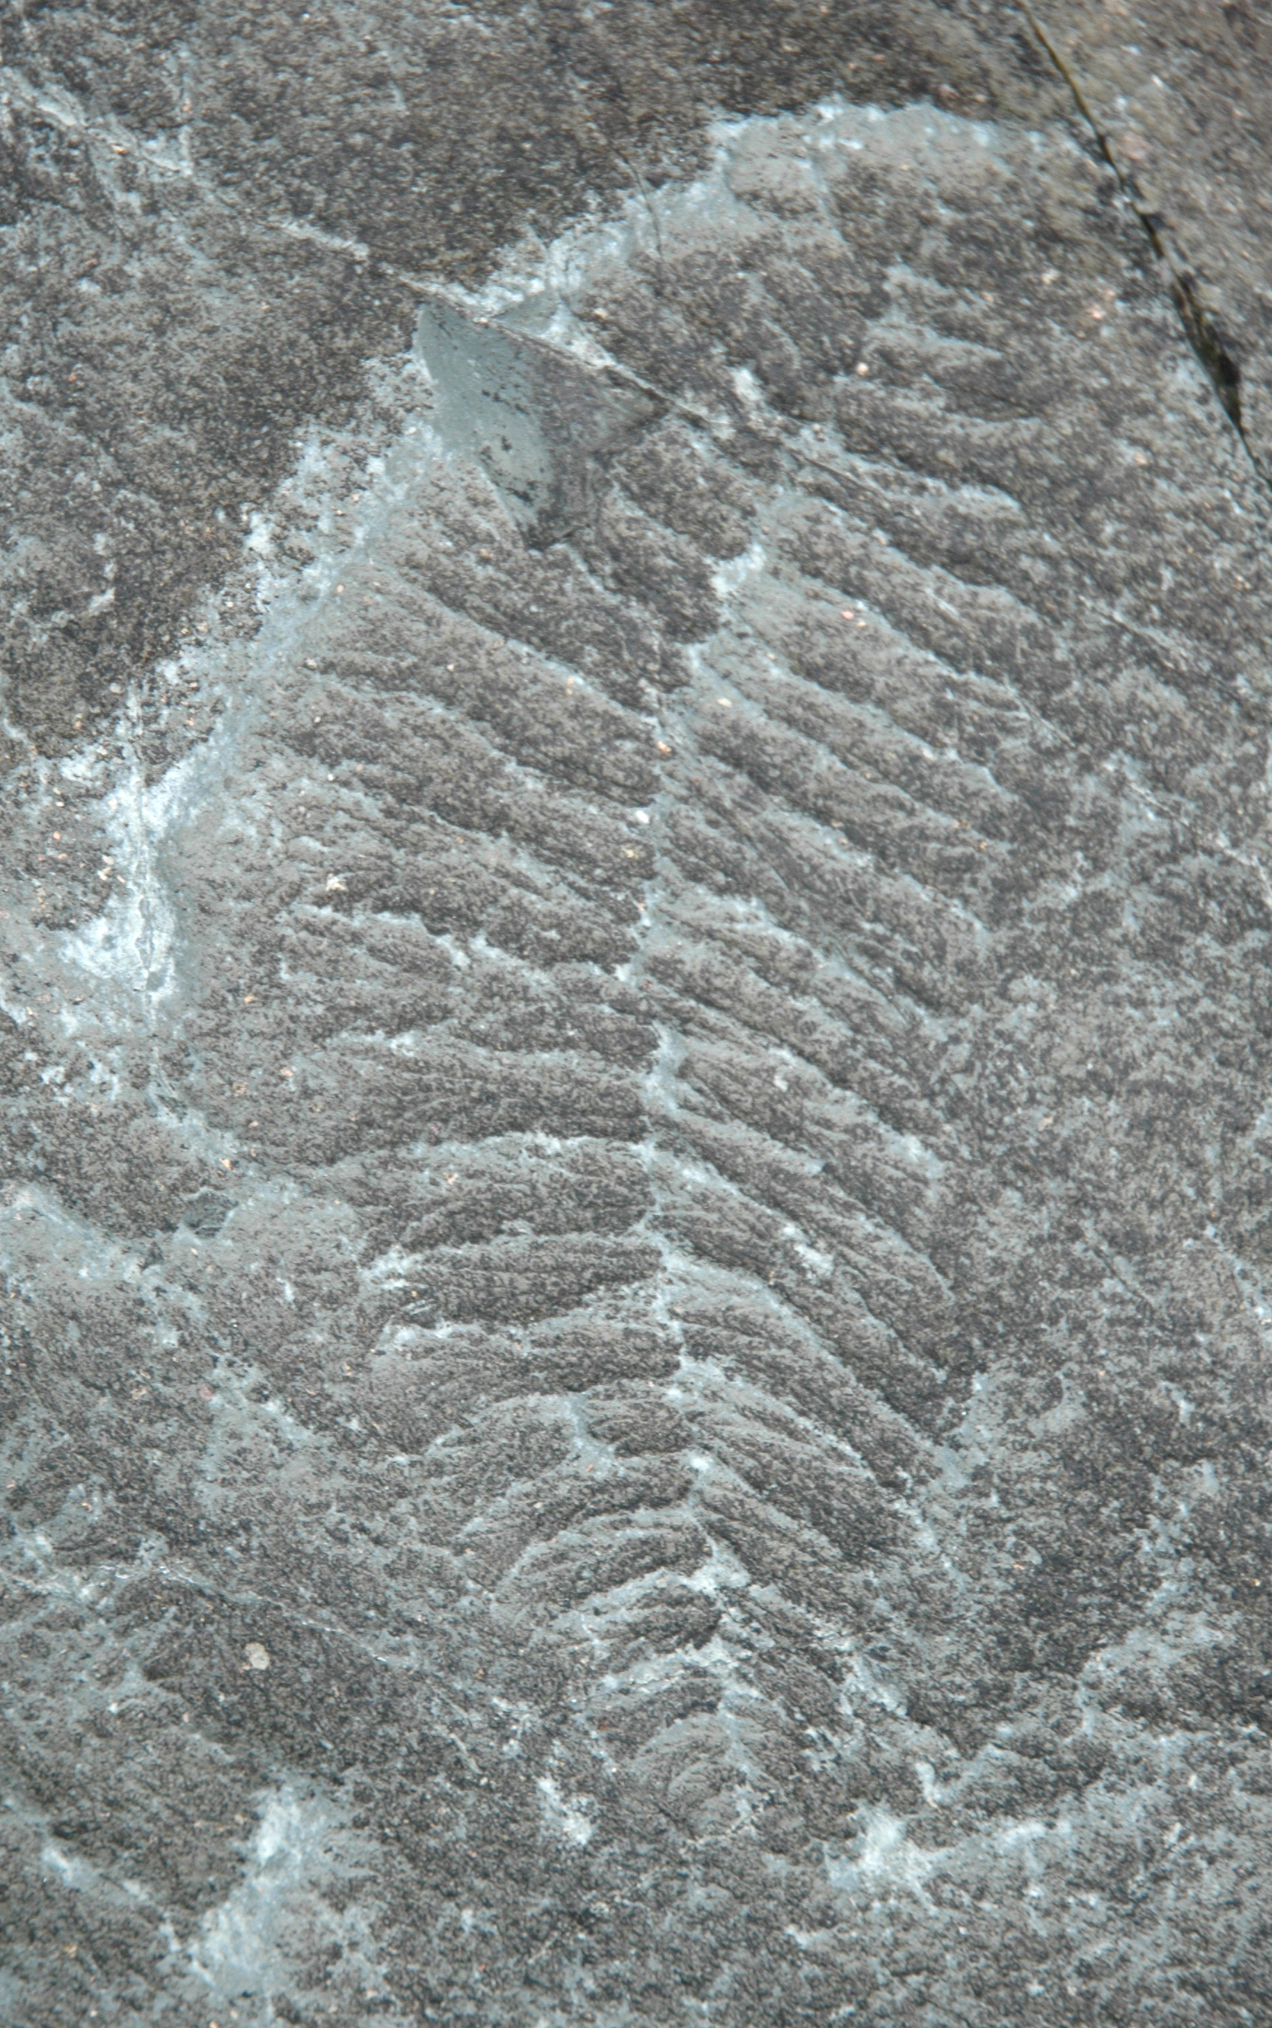 The Ediacara fossil Fractofusus misrai from the ~565 million year old Mistaken Point Formation in Newfoundland, Canada, represents the earliest Ediacara assemblage, known as the Avalon assemblage.